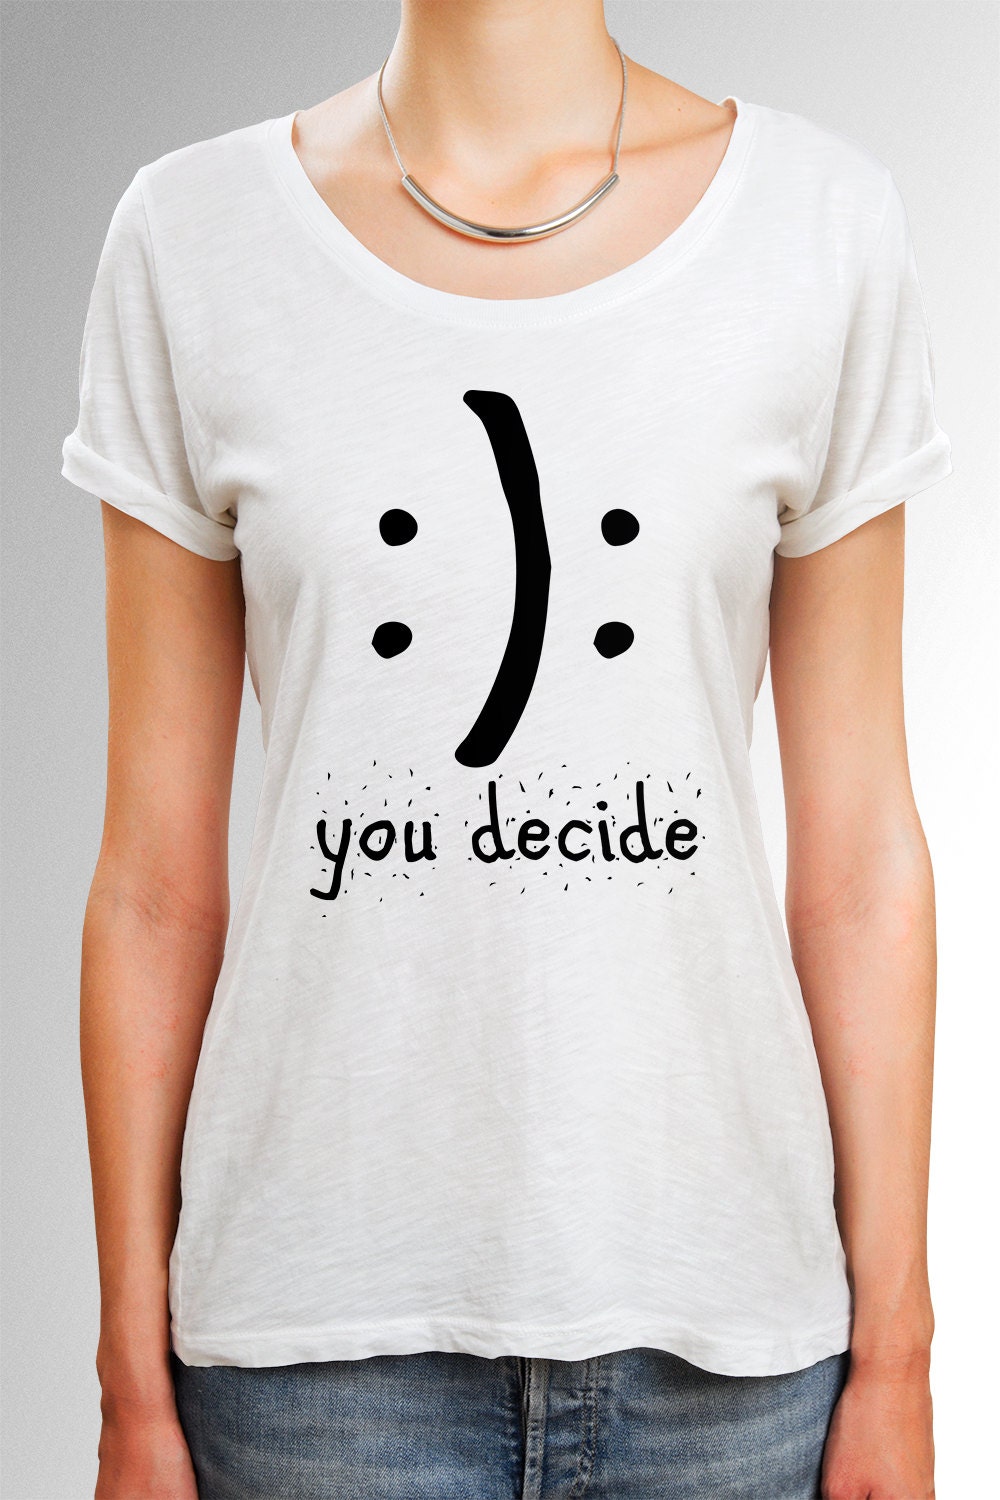 You decide shirt smiley face shirt Smiley decide t by quoteshirt